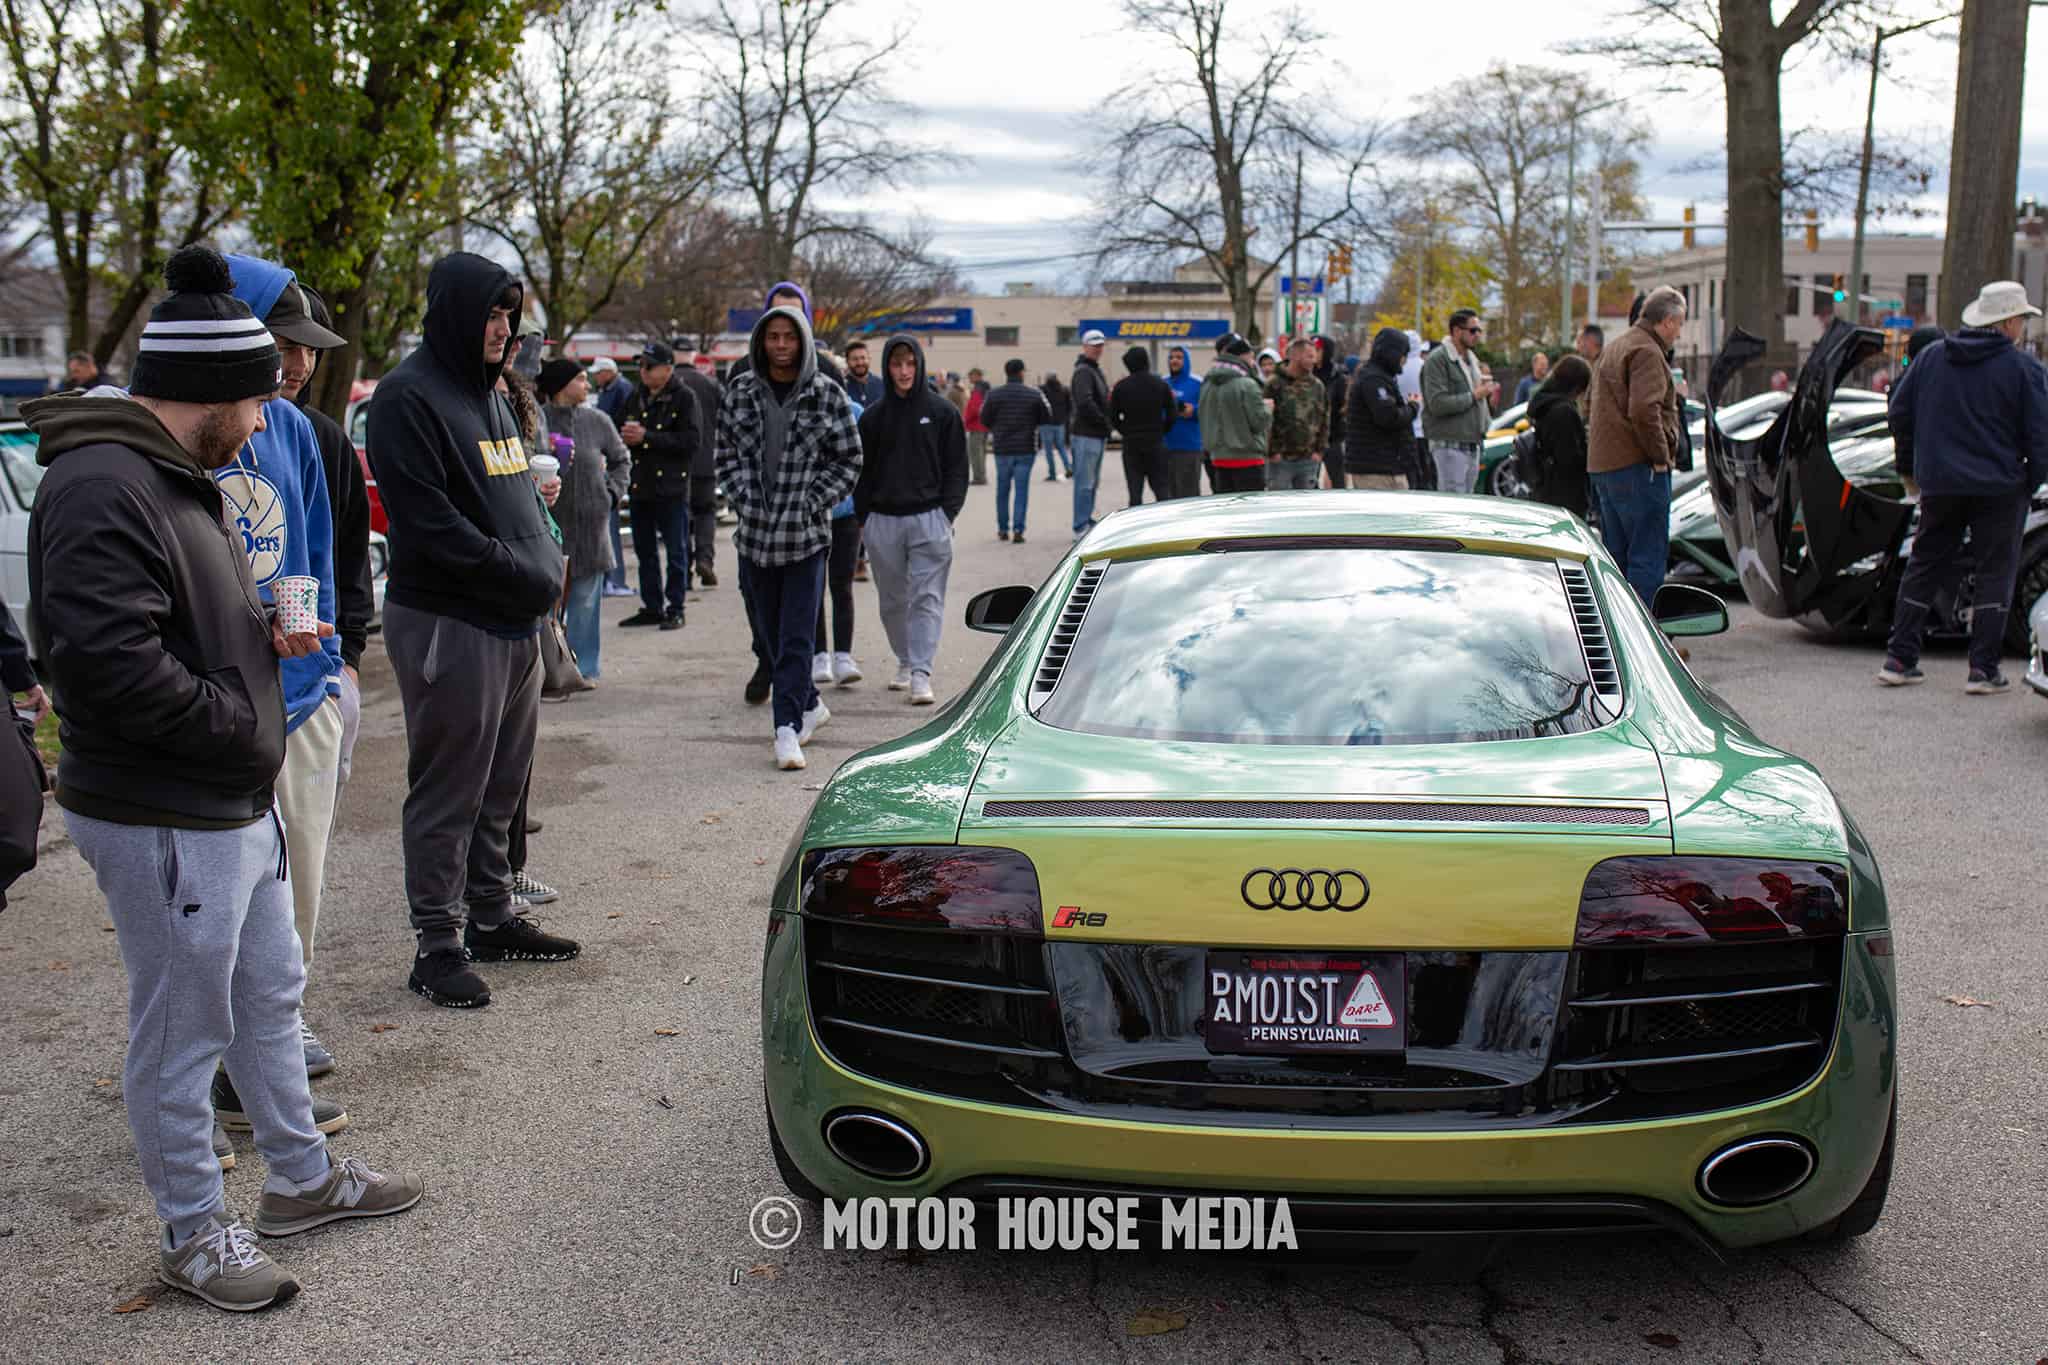 Motor House coverage at Mainline Cars & Coffee